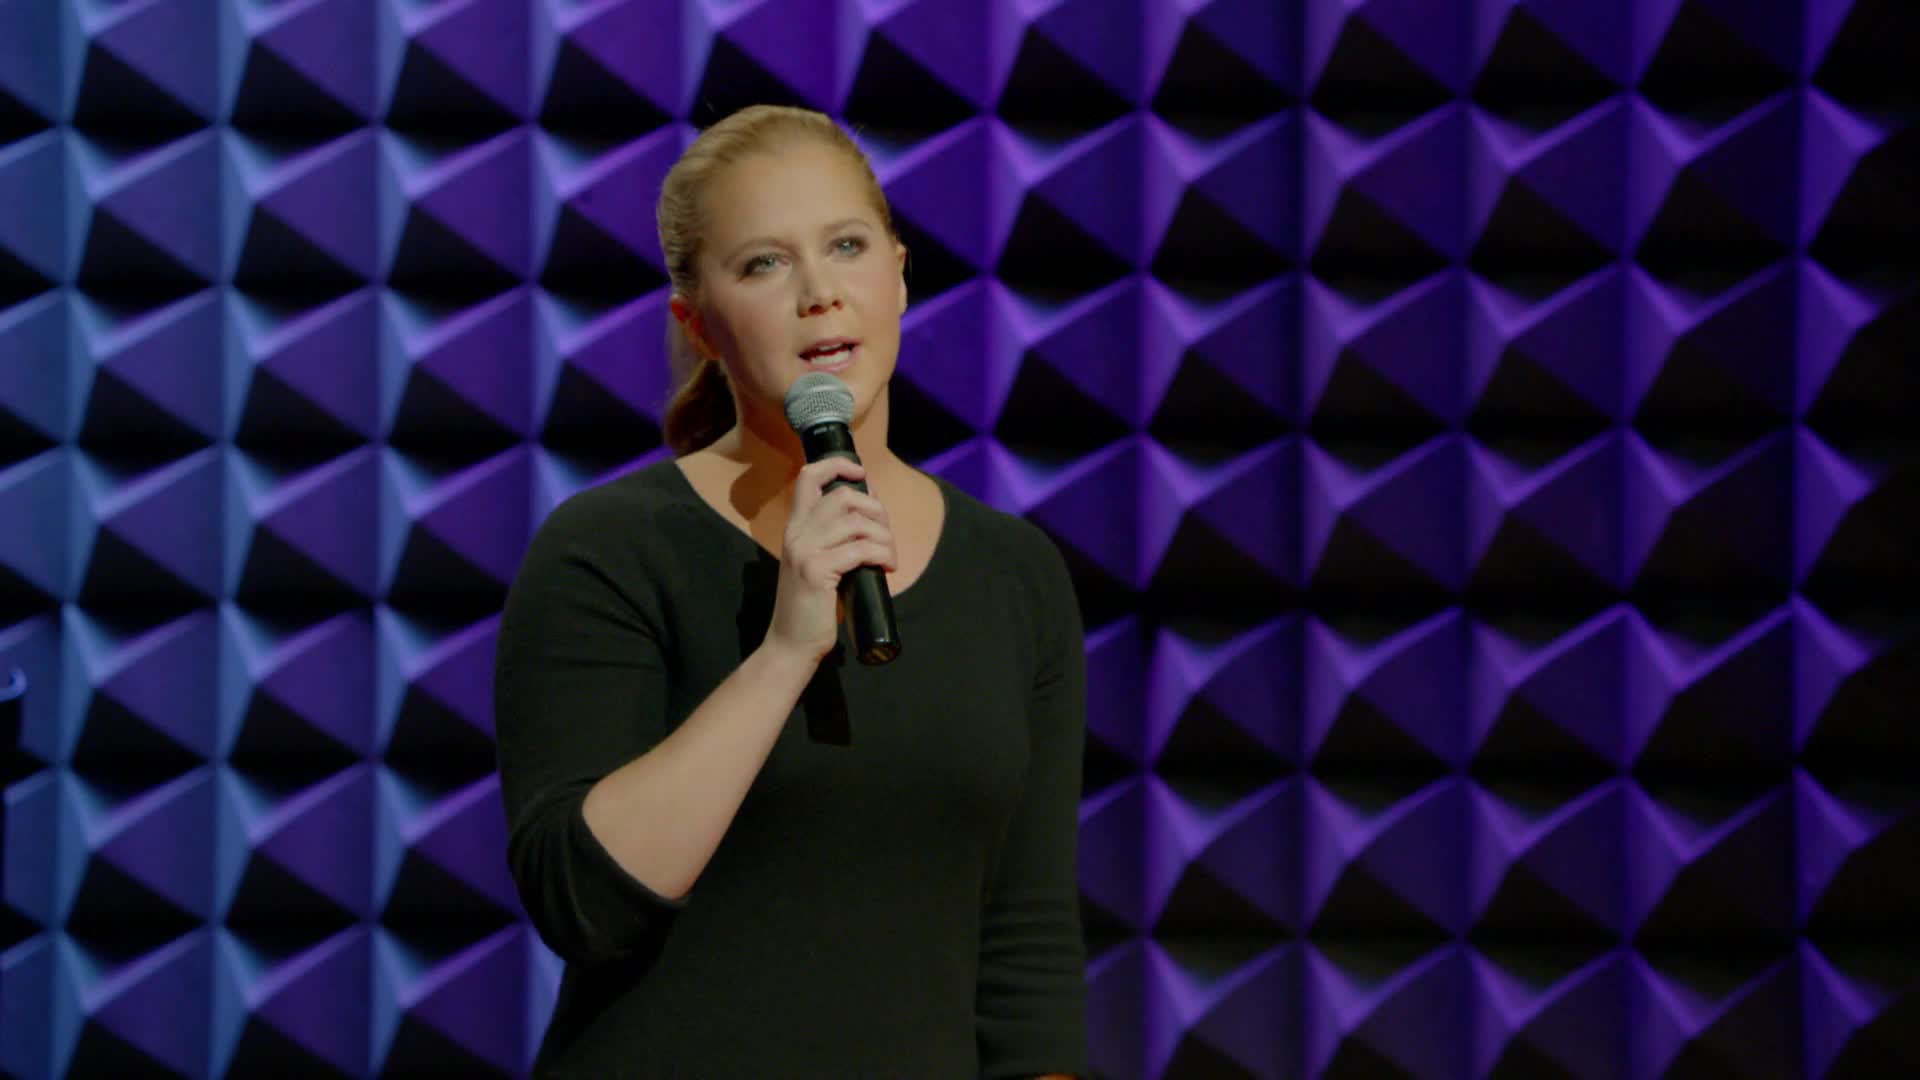 Watch Inside Amy Schumer Season 1 Episode 1 Bad Decisions Watch Full Episode Online Hd On